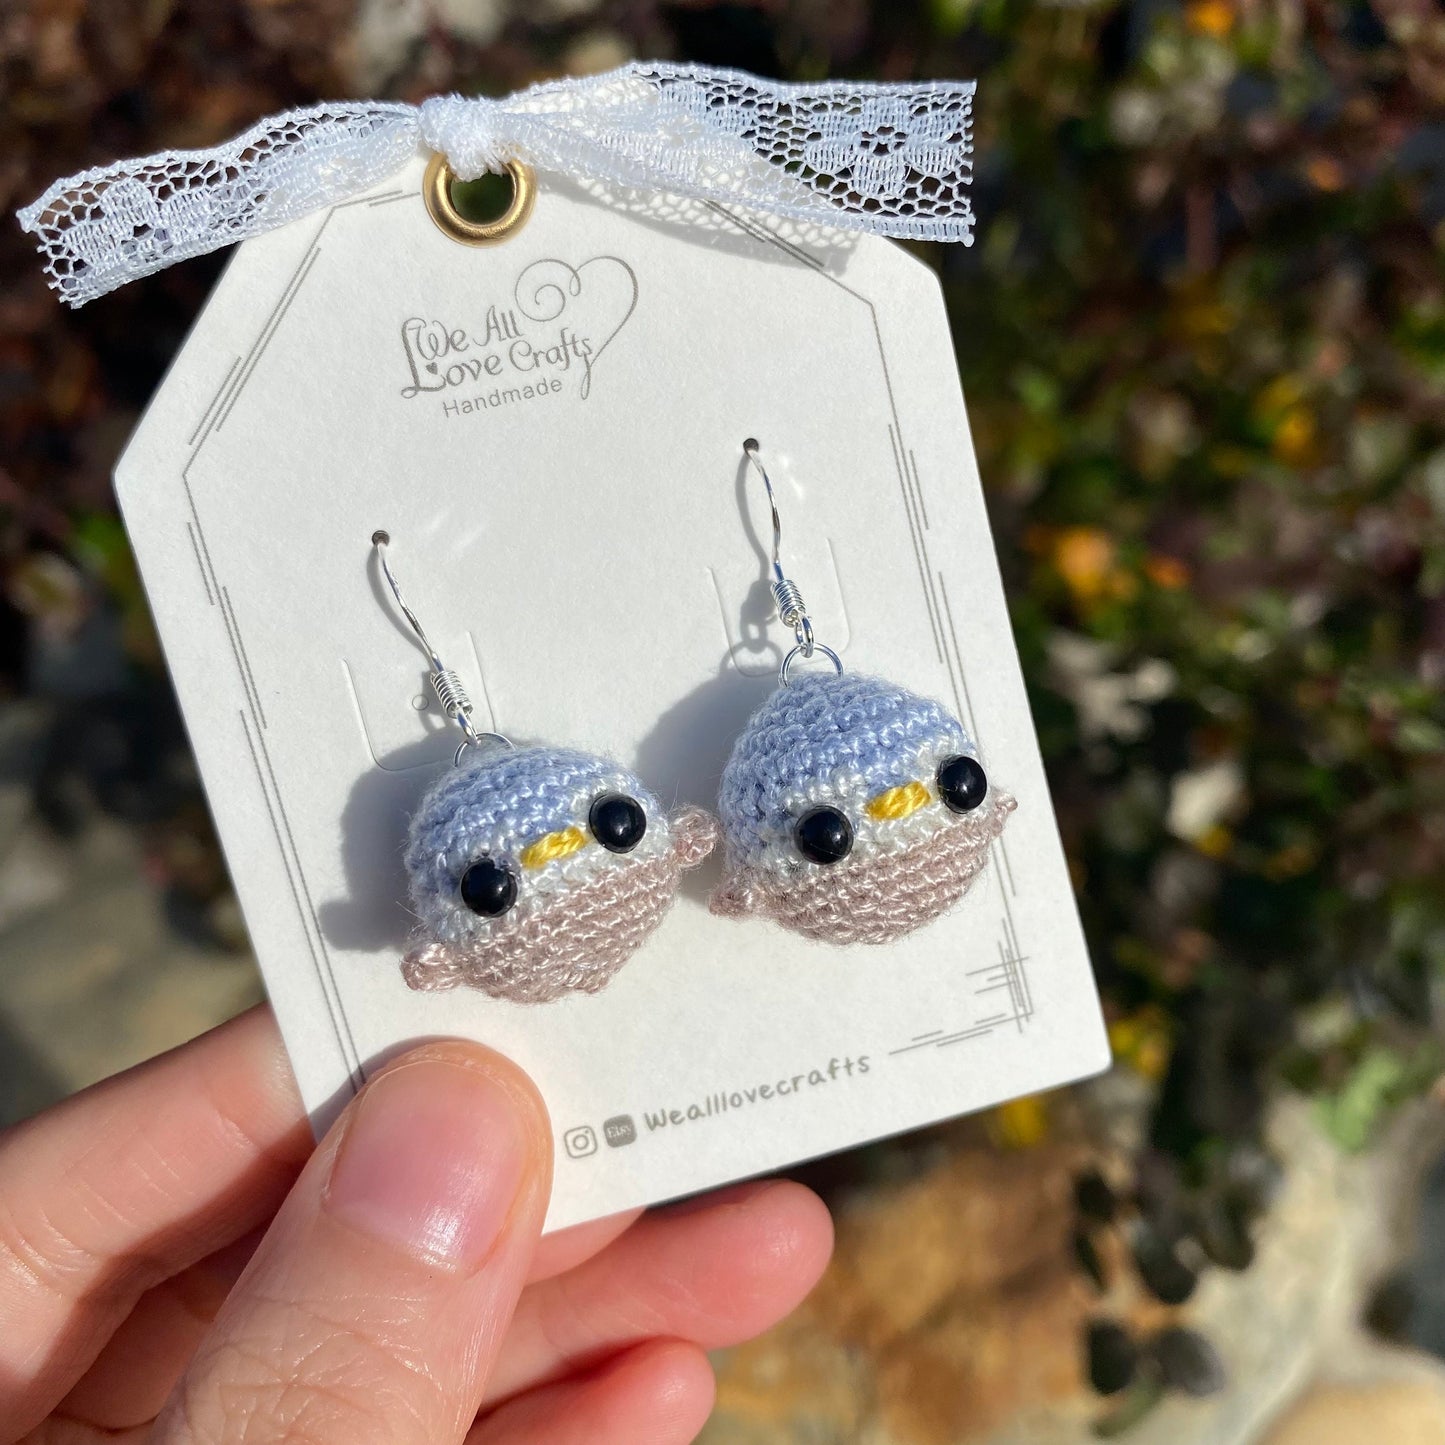 Blue and Gray 3D Amigurumi Kawaii Penguin crochet dangled earrings/Microcrochet/925 Sterling silver jewelry/gift for her/Ship from US